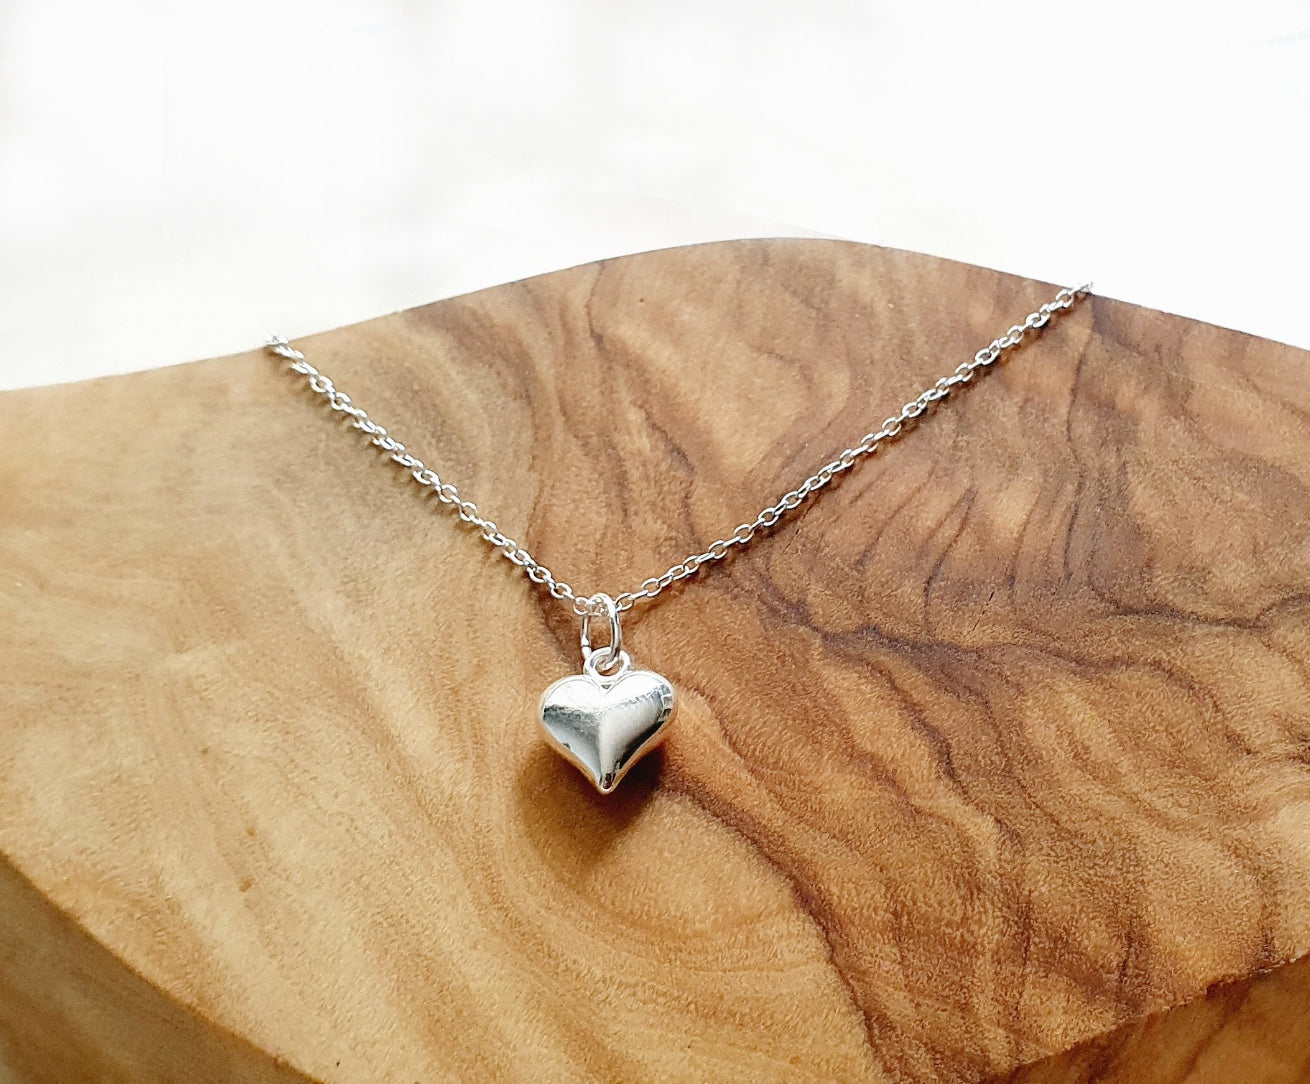 Godmother Puffy Heart Necklace in Sterling Silver 925, Personalised Gift